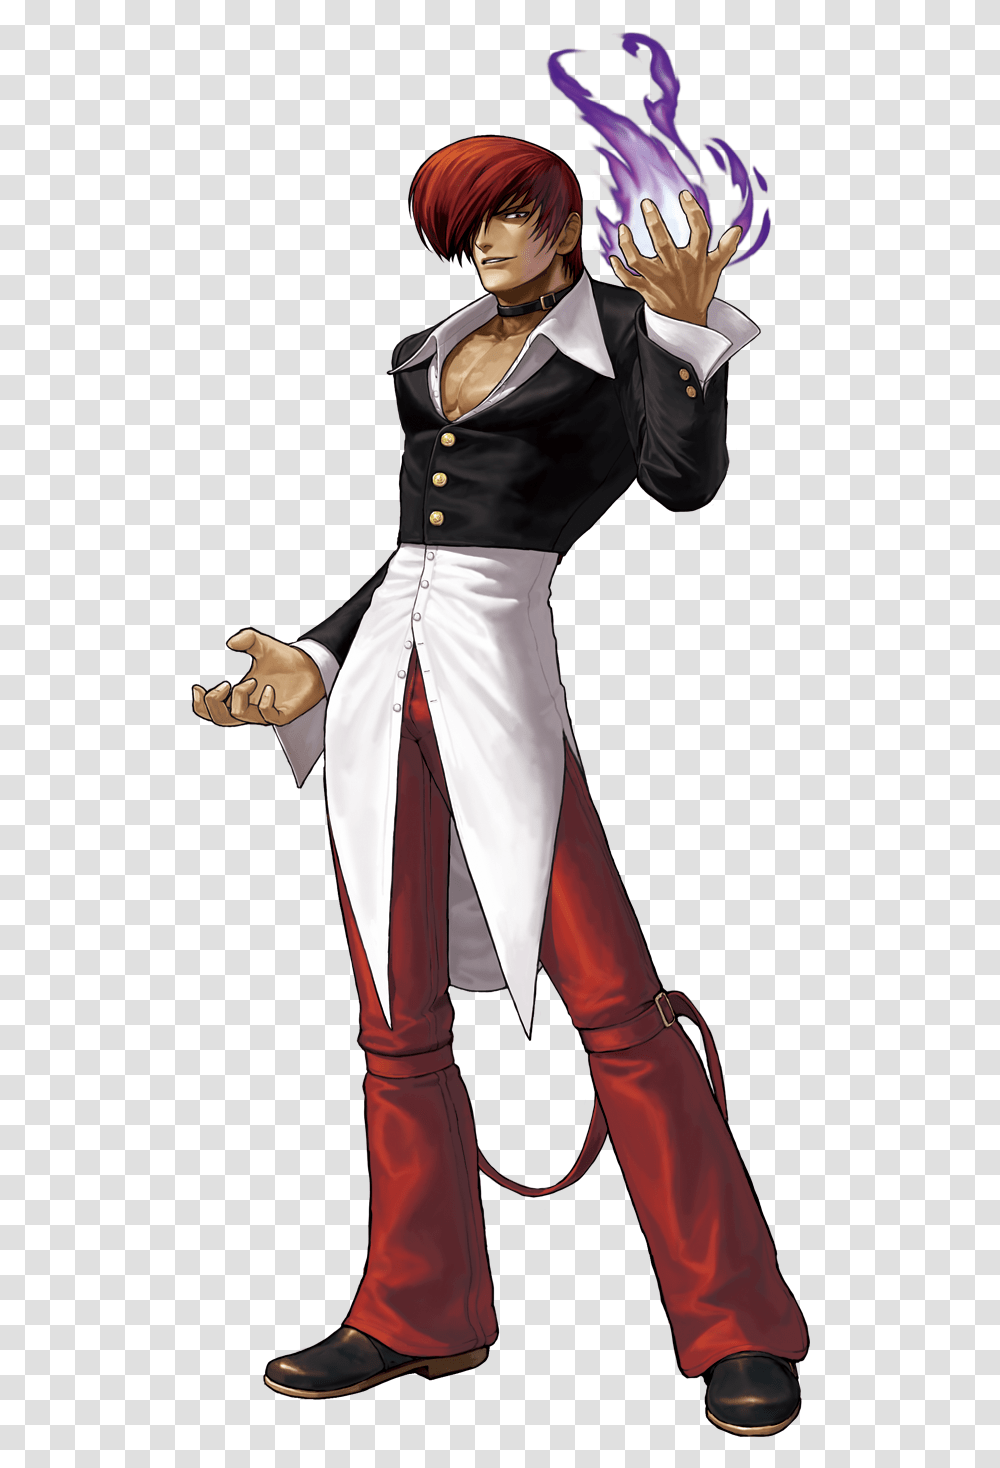 Yagami Iori 1410628 Hd Wallpaper & Backgrounds Download Kof Xiii Mr Karate, Person, Clothing, Female, Dance Transparent Png